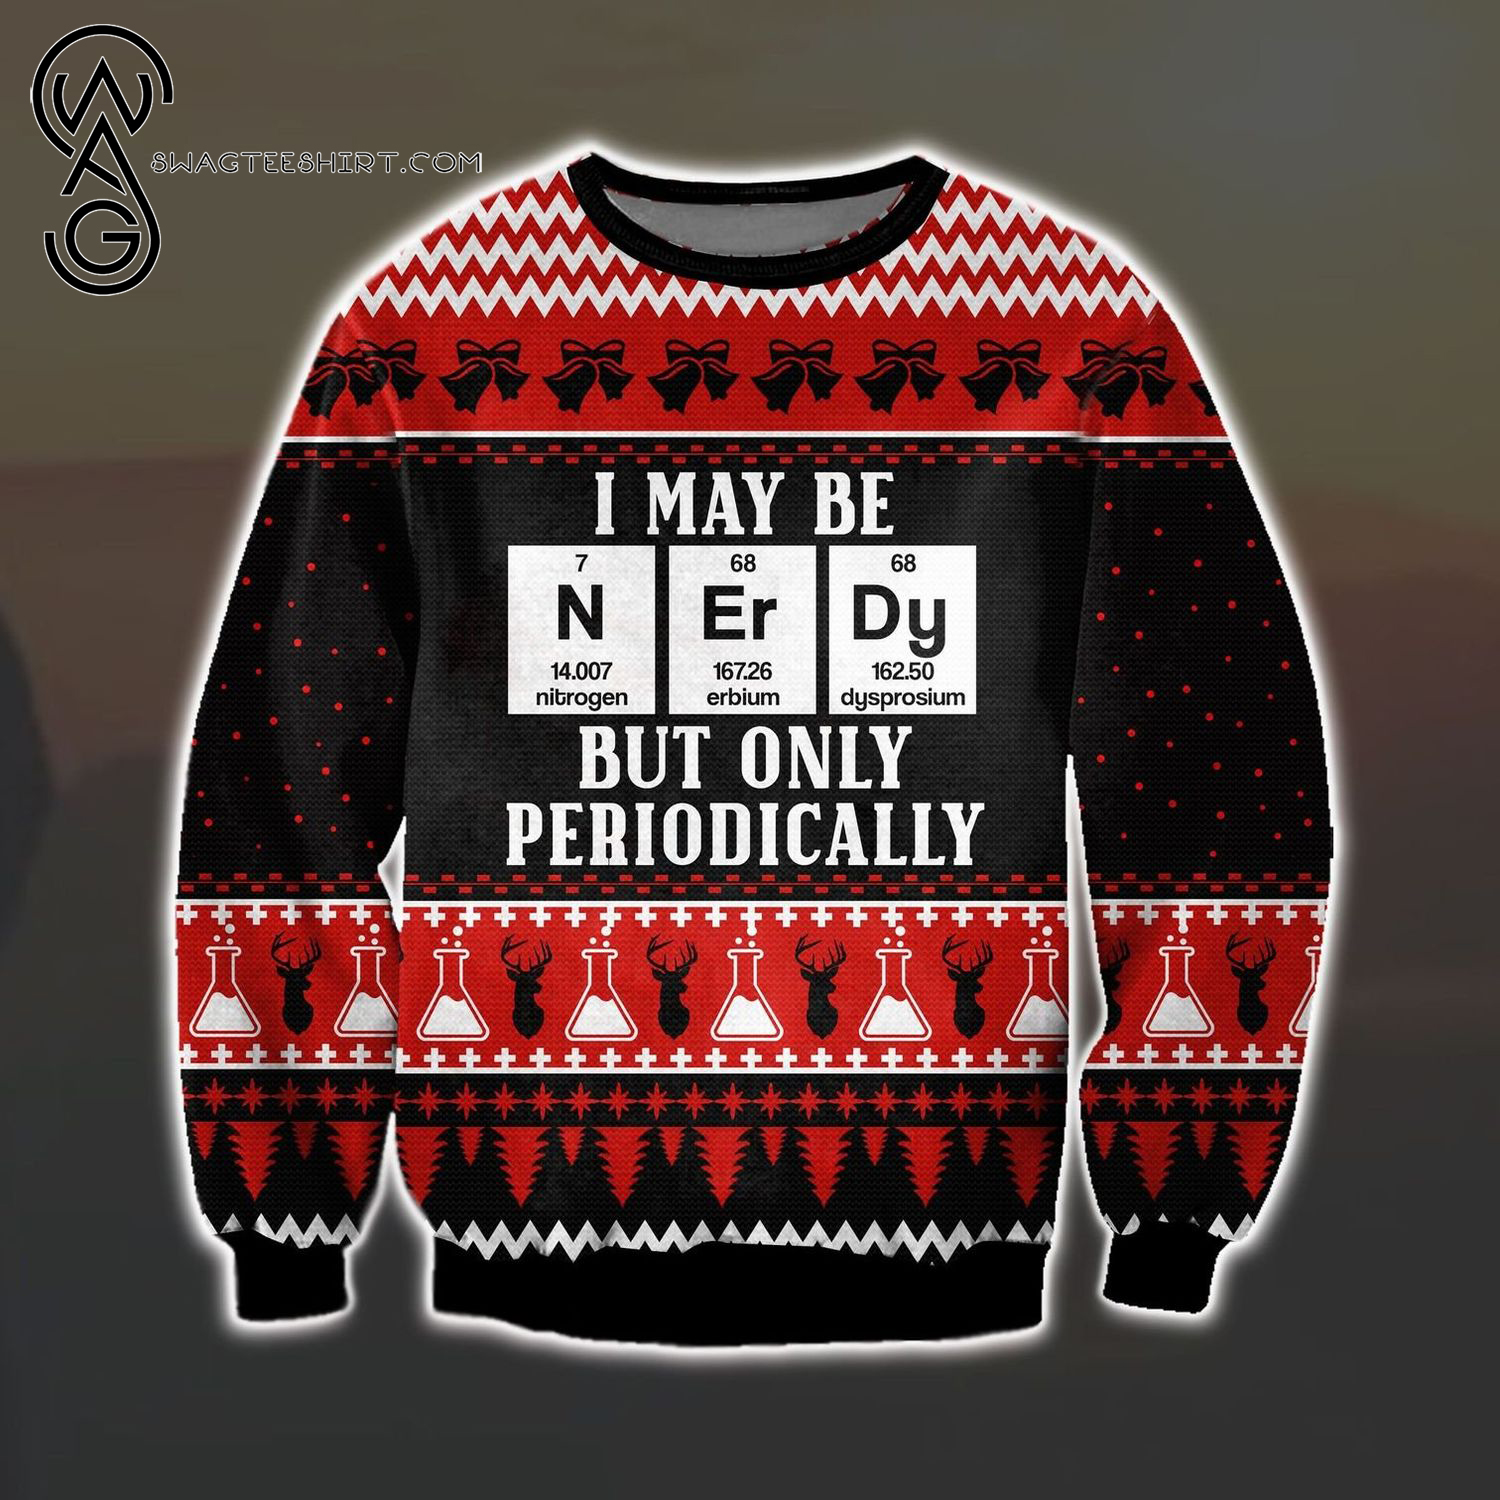 I May Be Nerdy But Only Periodically Full Print Ugly Christmas Sweater